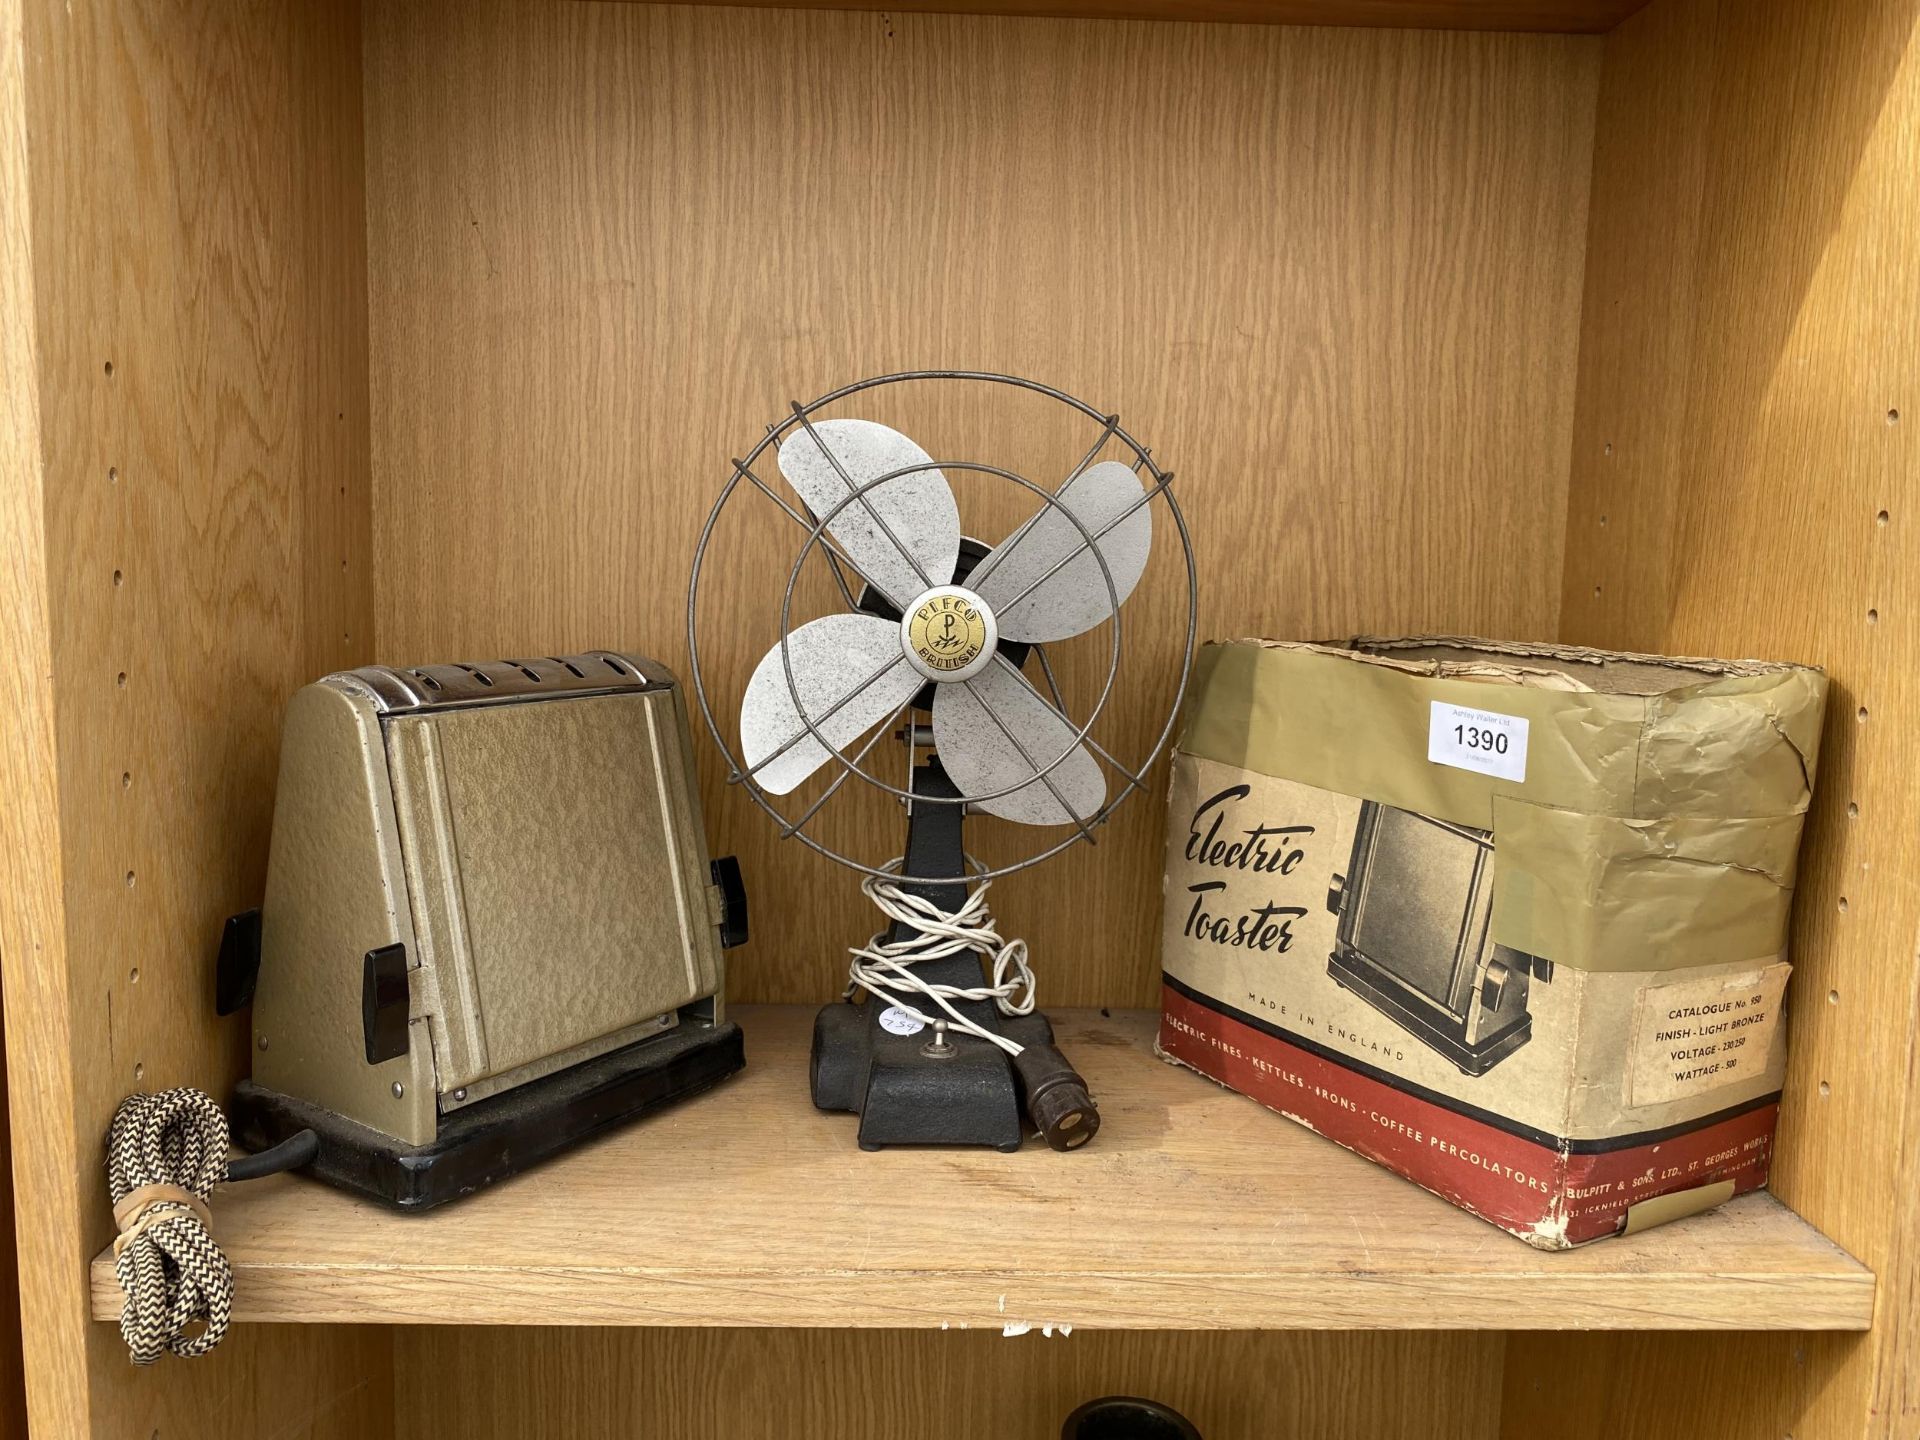 A VINTAGE PIFCO FAN AND A SWAN BRAN TOASTER